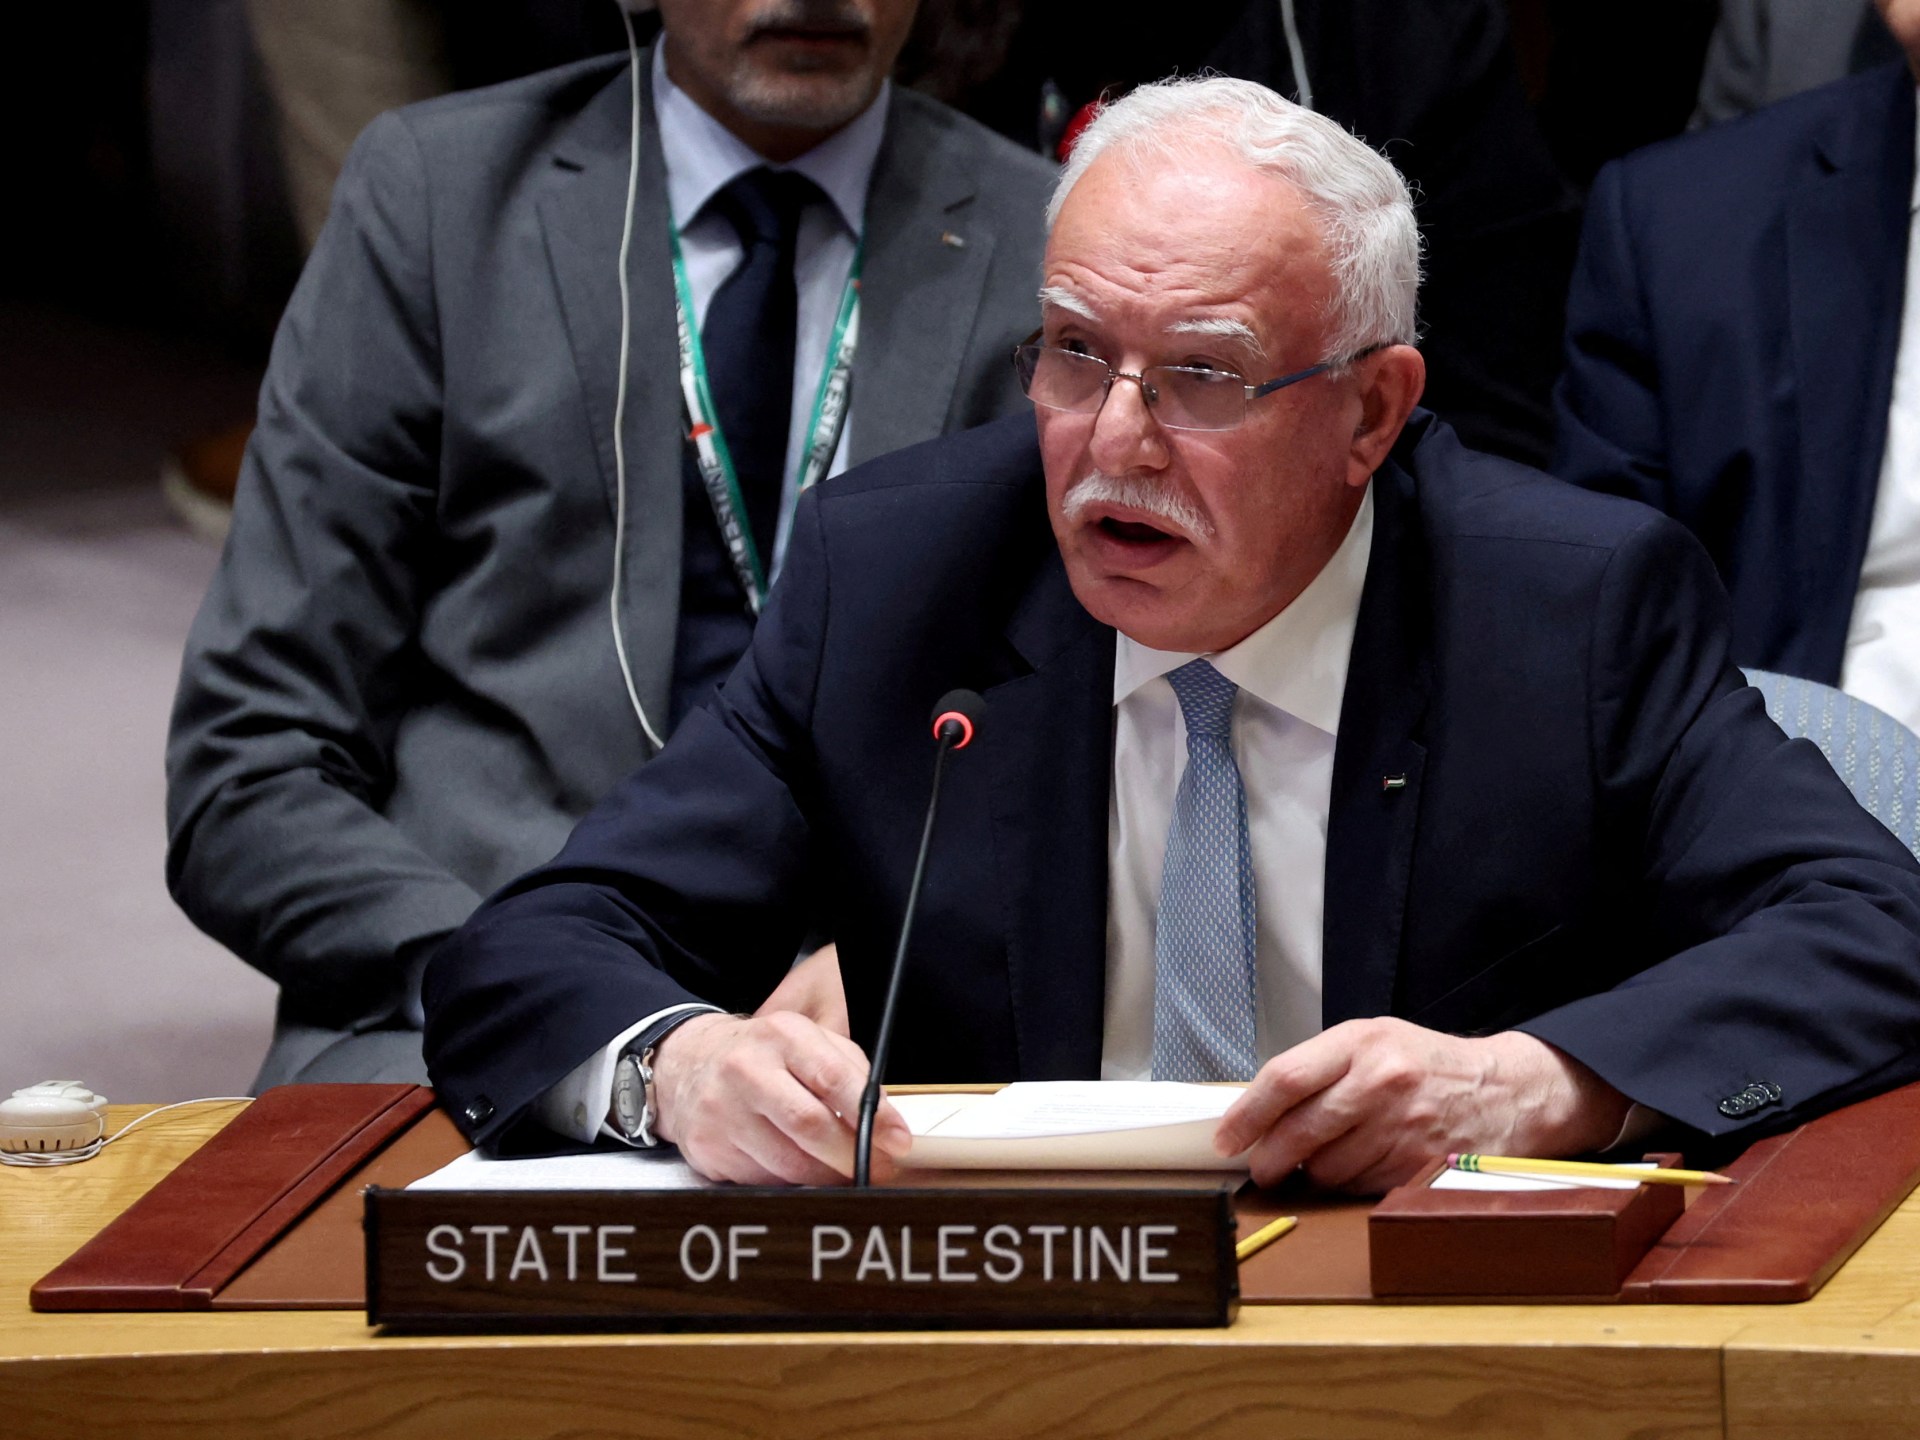 As the UN votes on Israel-Gaza war, Palestine can only observe | Israel-Palestine conflict News